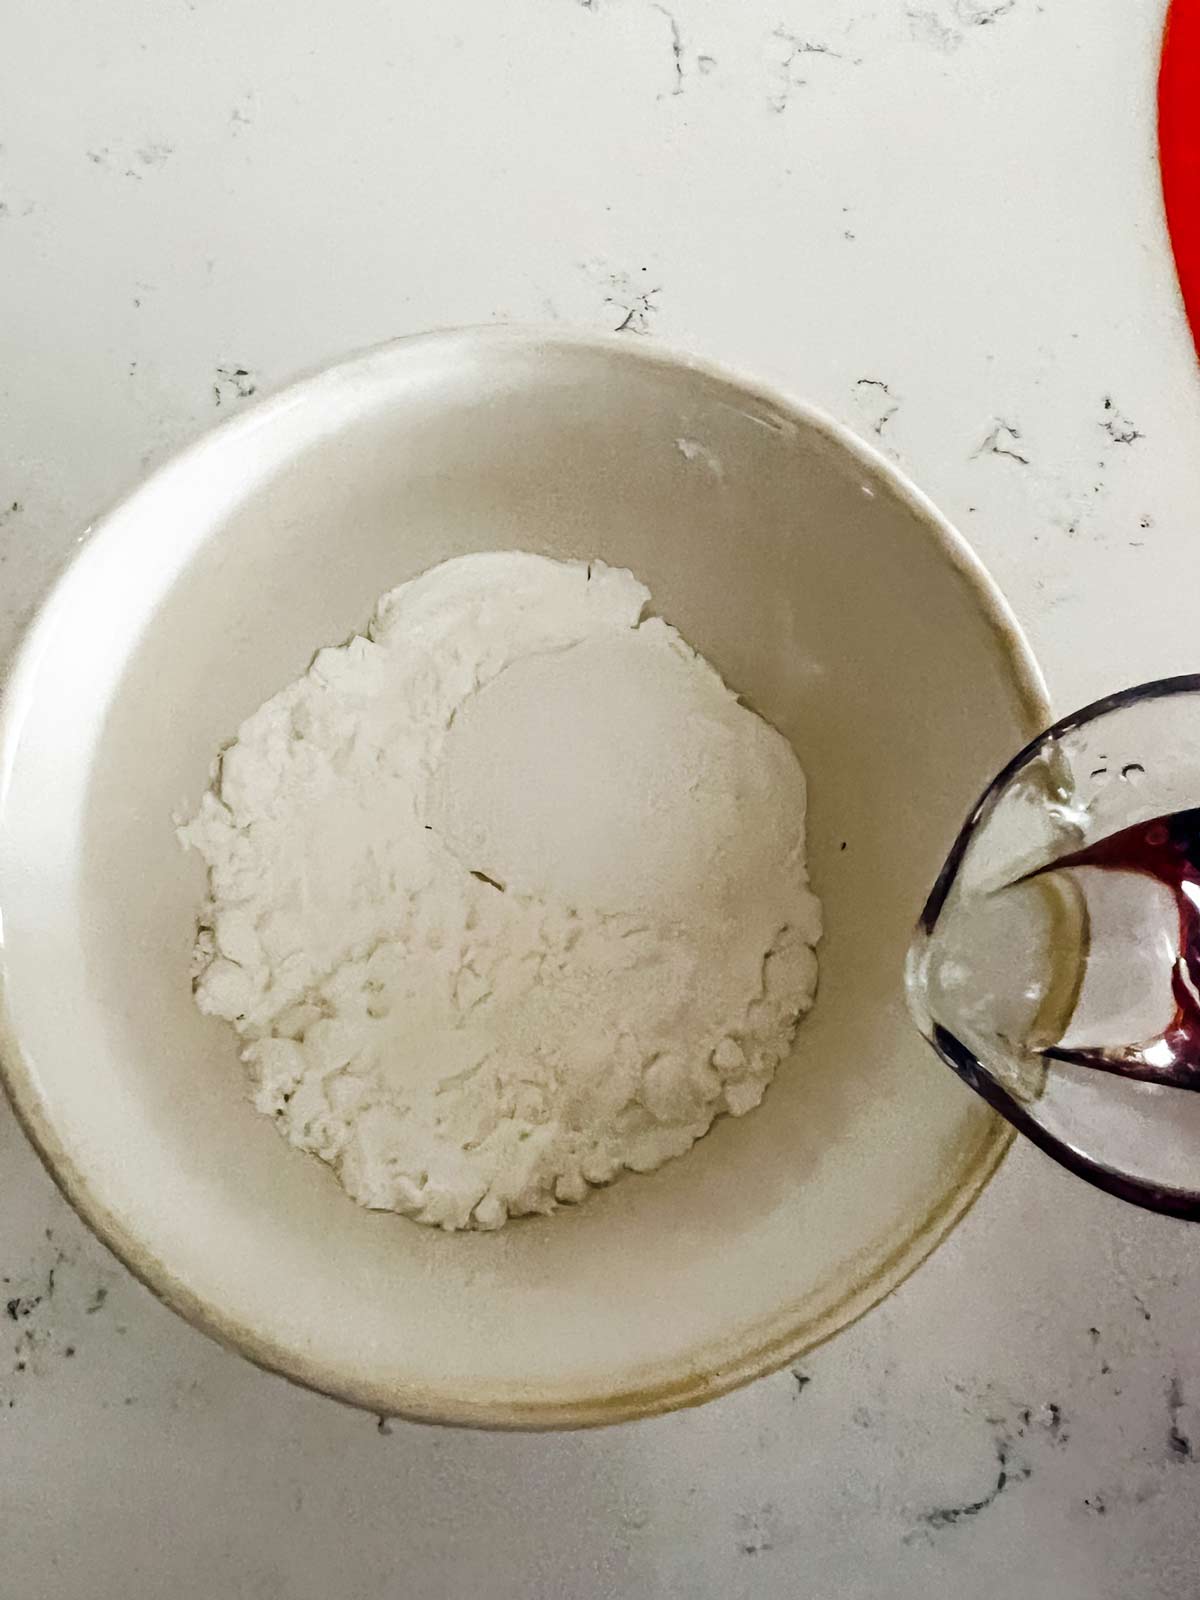 Water and cornstarch being mixed together to form a slurry.